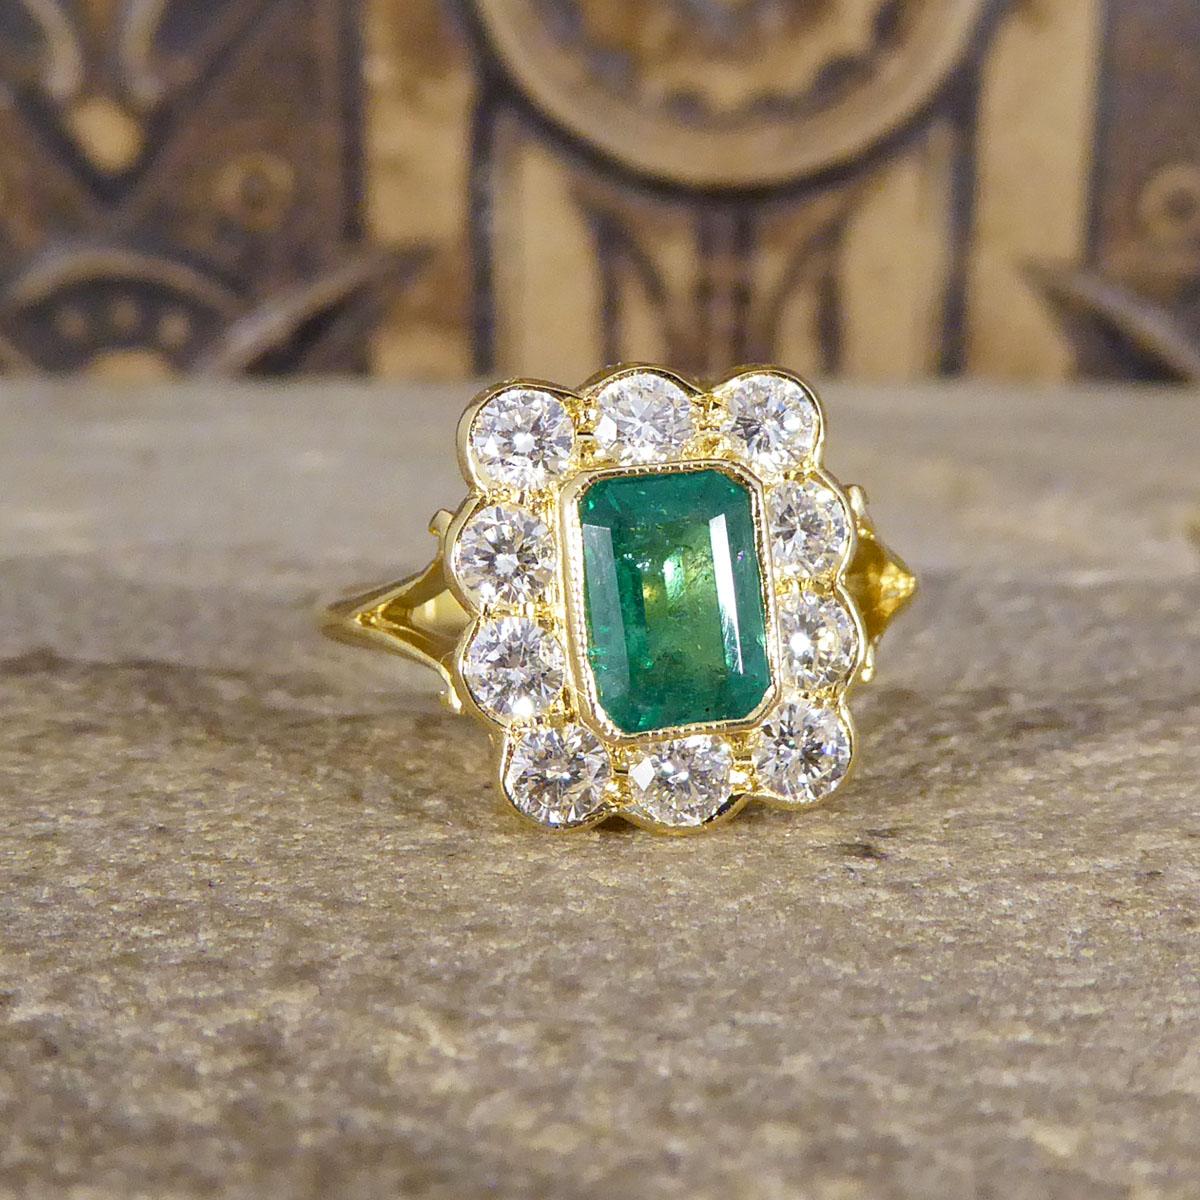 This beautiful Contemporary Emerald and Diamond ring would make the perfect engagement or statement ring. It has been crafted to reflect an Edwardian style Ring, with one single 0.90ct Emerald Cut Emerald with natural flaws in the stone making it